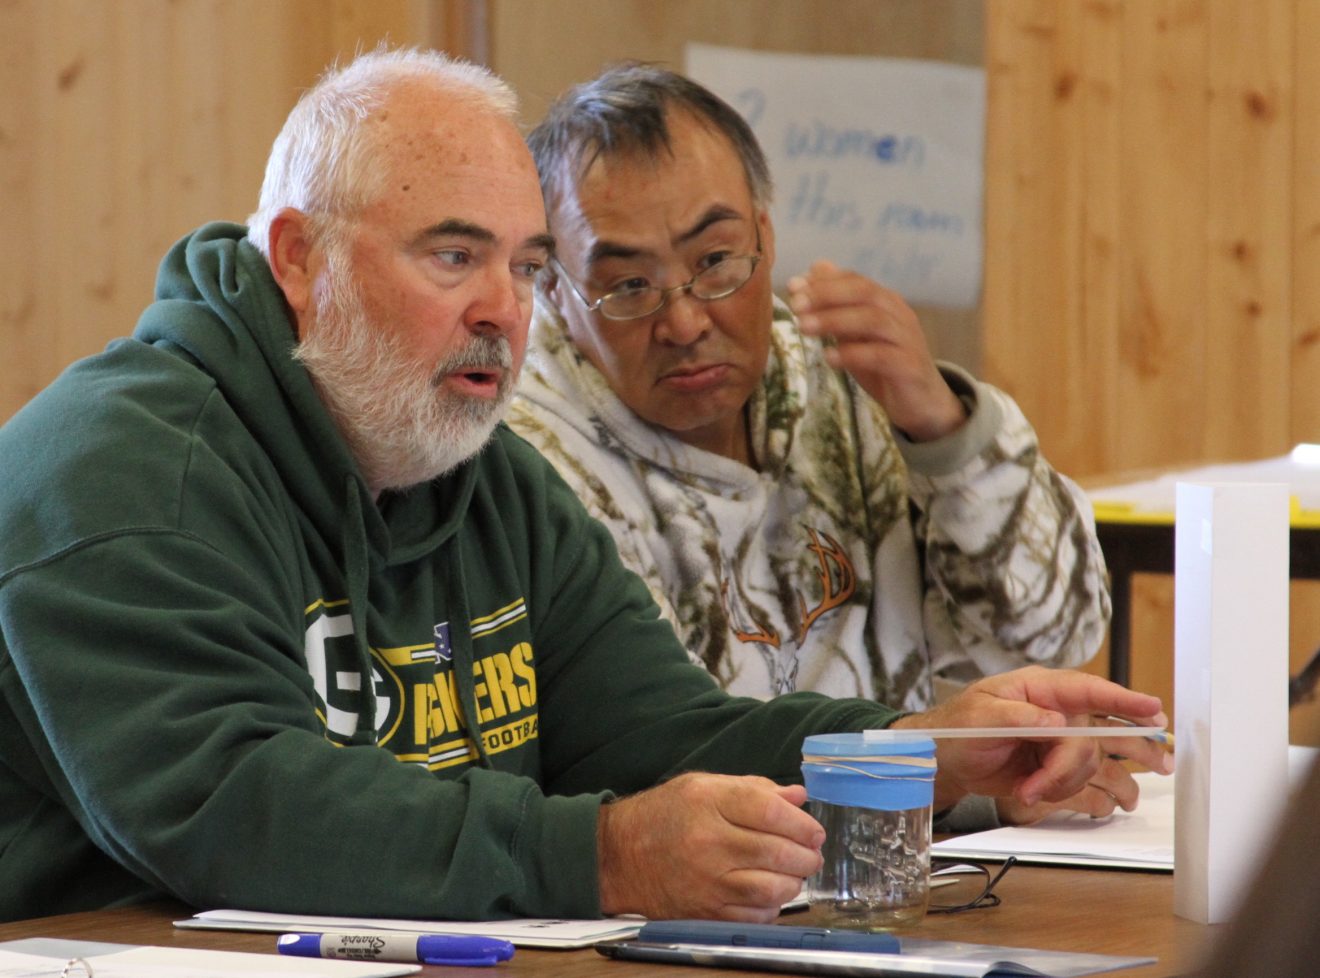 Yuri Bult-Ito photoEducators Mark Vachvake of Elim and Richard Waghiyi of Savoonga work together on a science lesson activity at a professional development workshop held in Unalakleet, Alaska.